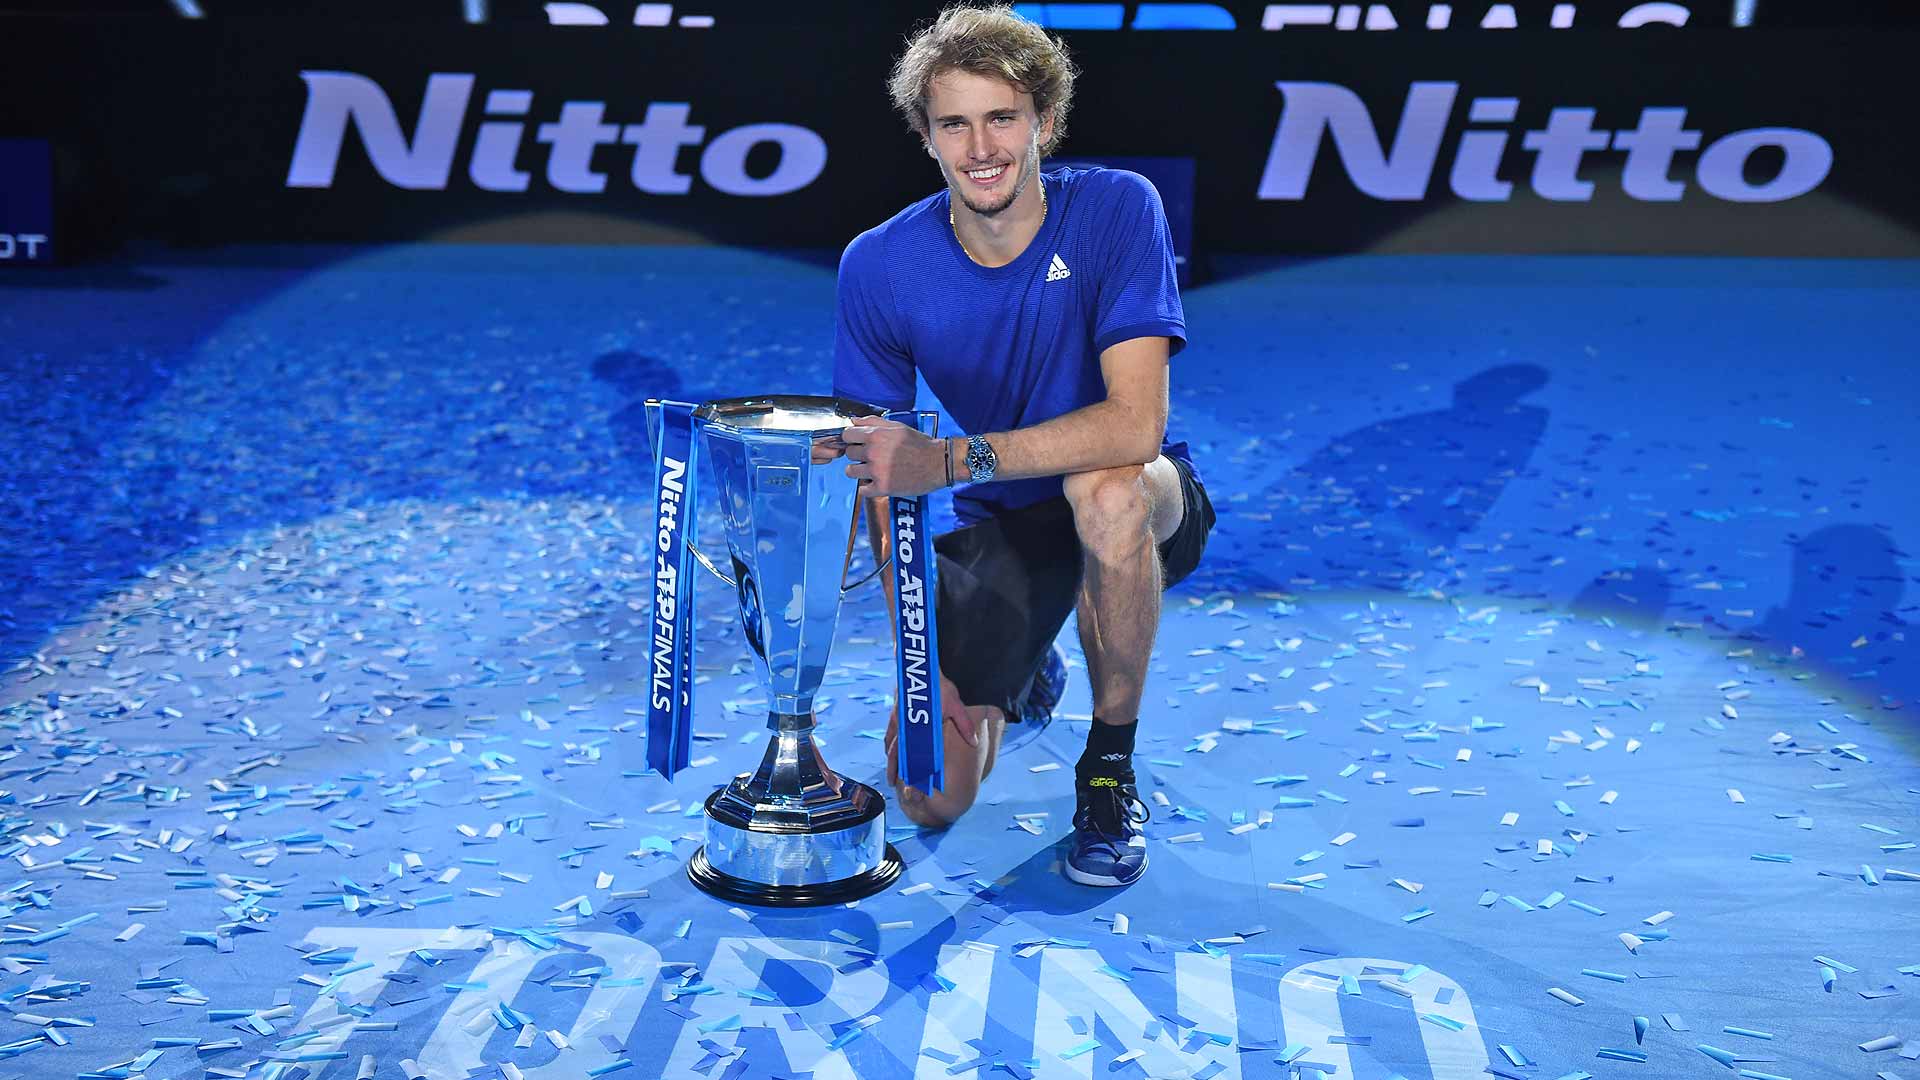 Five Takeaways From The 2021 Nitto ATP Finals